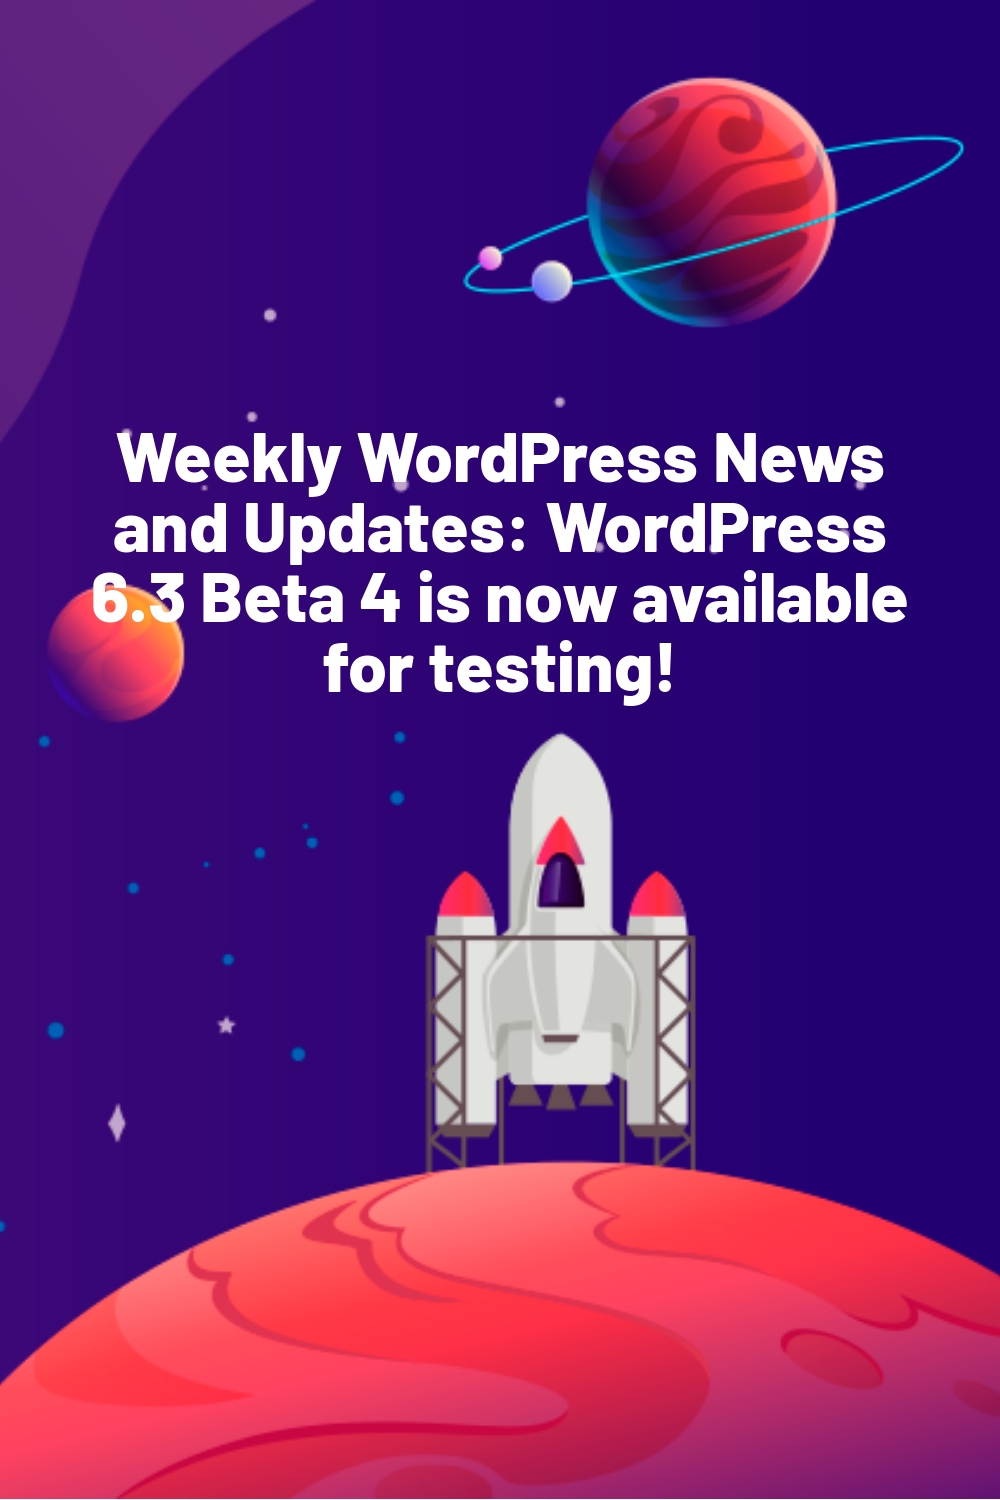 Weekly WordPress News and Updates: WordPress 6.3 Beta 4 is now available for testing!